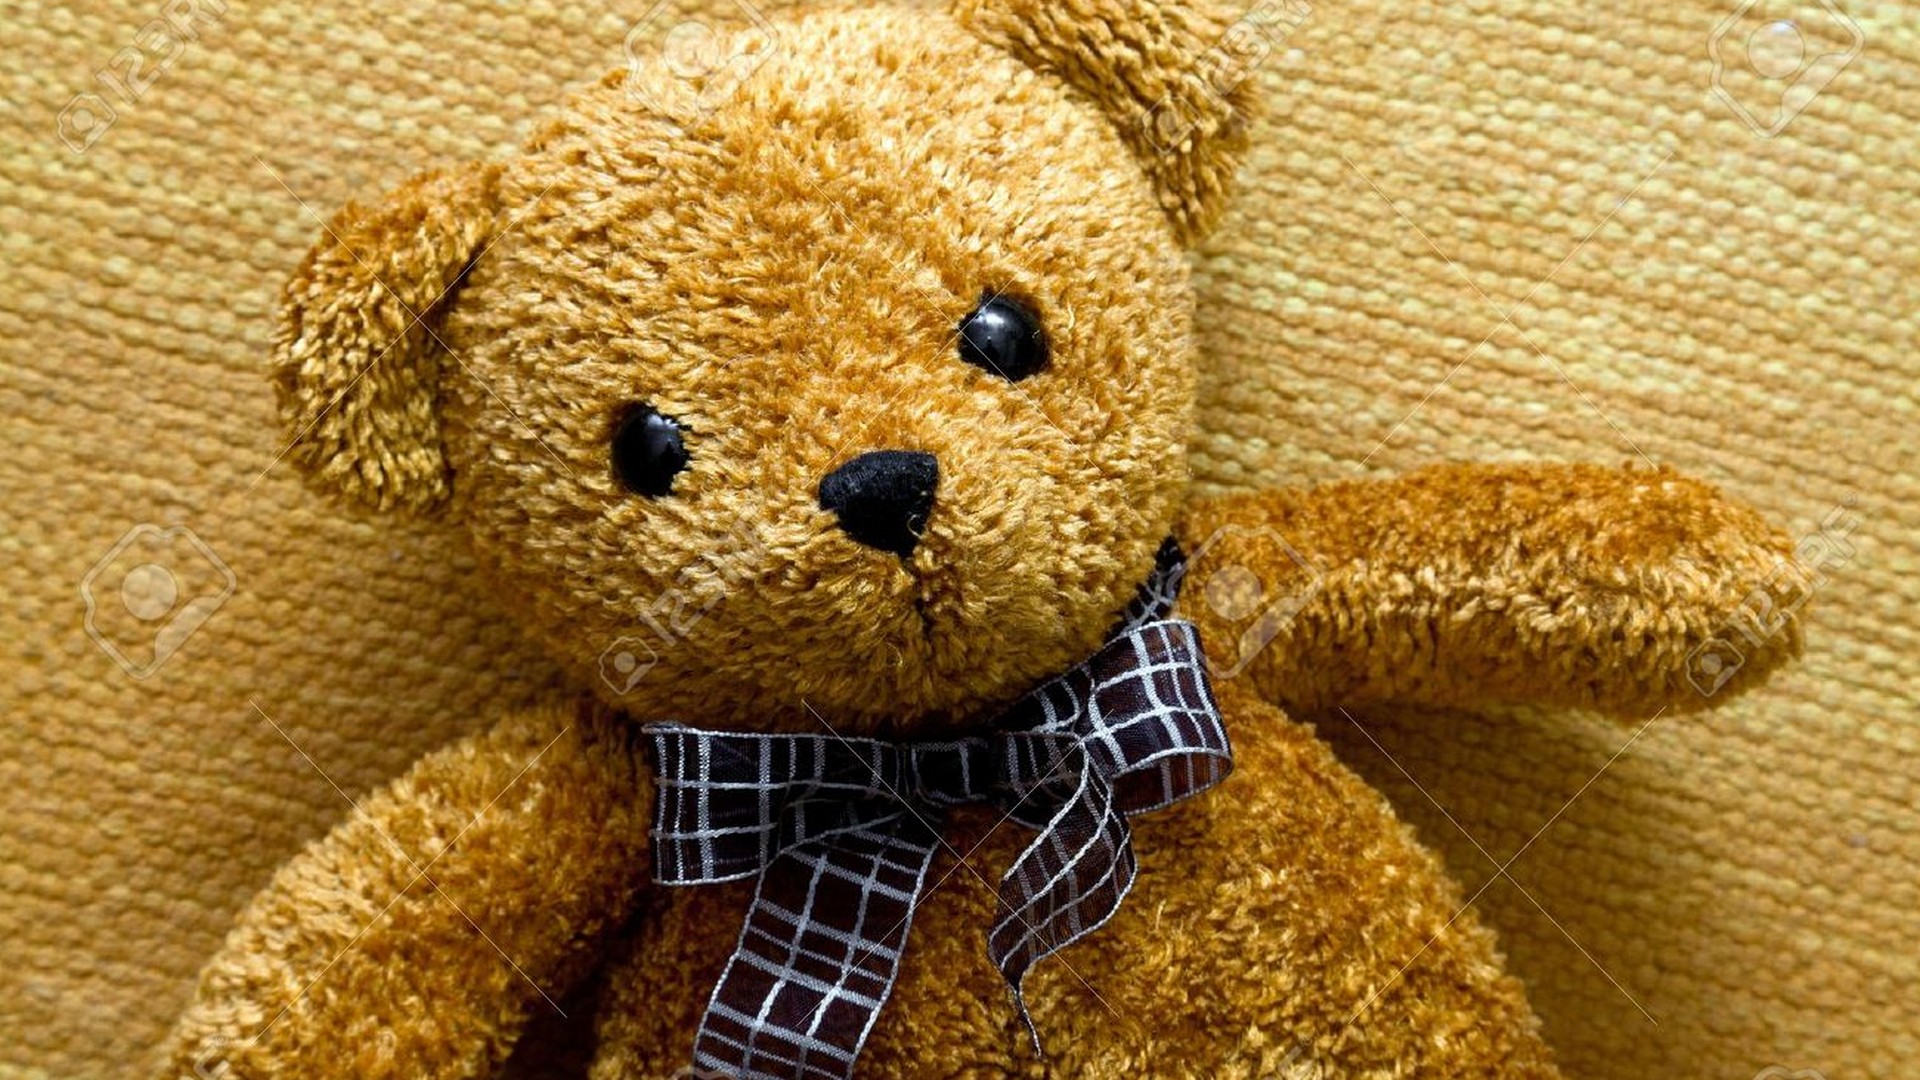 Teddy Bear Desktop Backgrounds with image resolution 1920x1080 pixel. You can make this wallpaper for your Desktop Computer Backgrounds, Mac Wallpapers, Android Lock screen or iPhone Screensavers